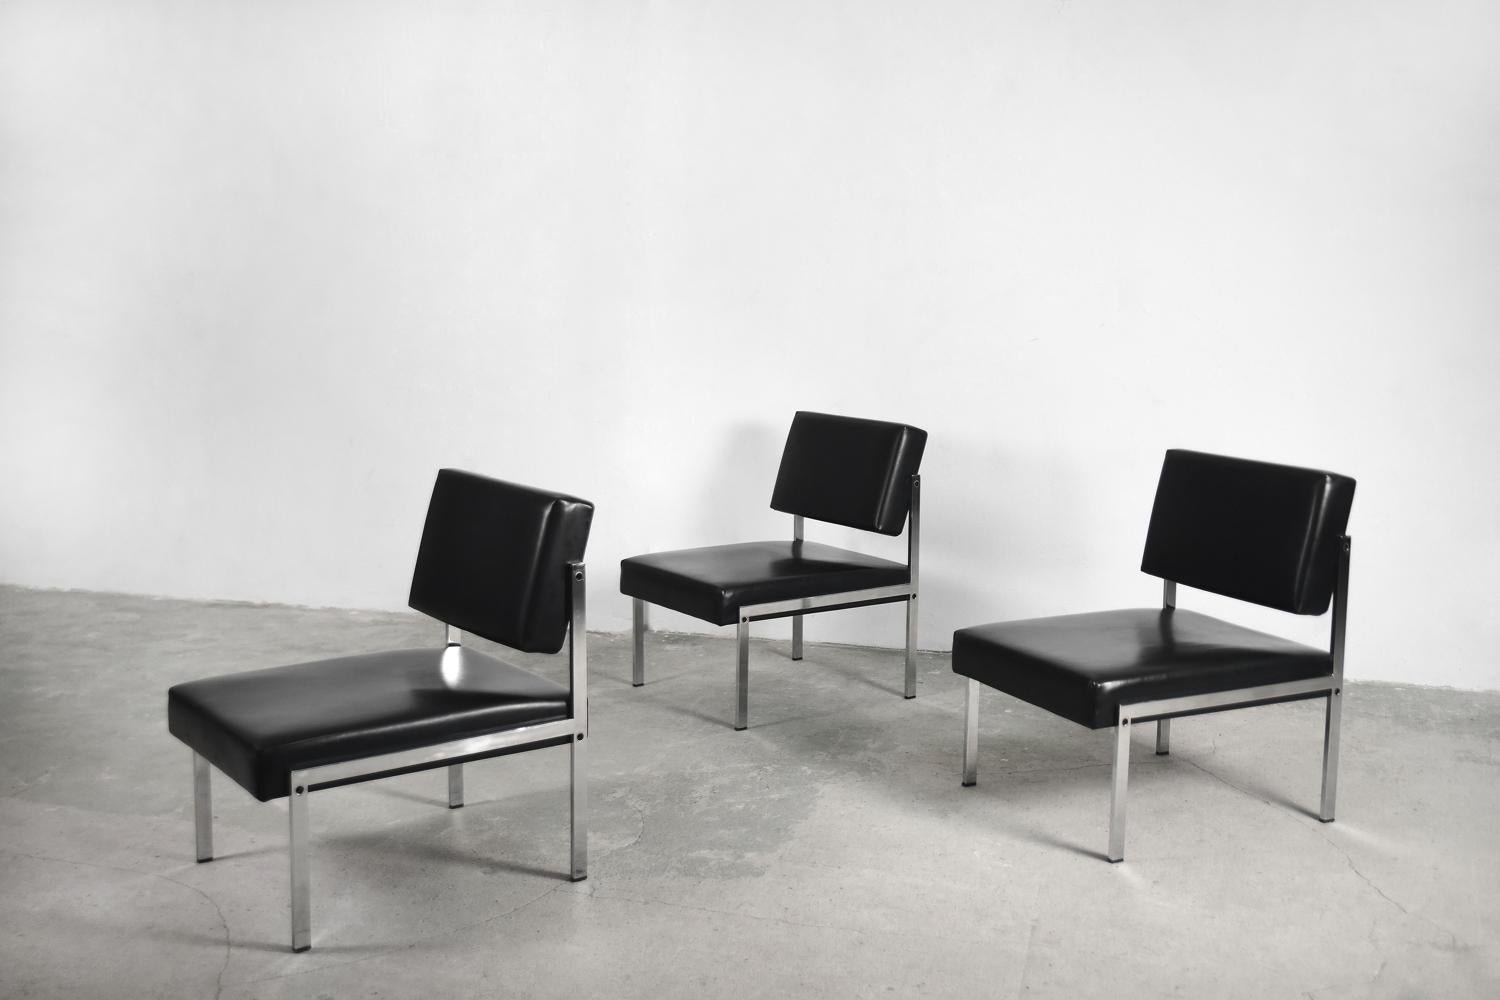 This Minimalist and elegant easy chairs were produced by Brune, German manufactory founded in 1945. This model was created during the 1960s but not for regular offer. Those were maybe for an individual custom project. This set consists of three